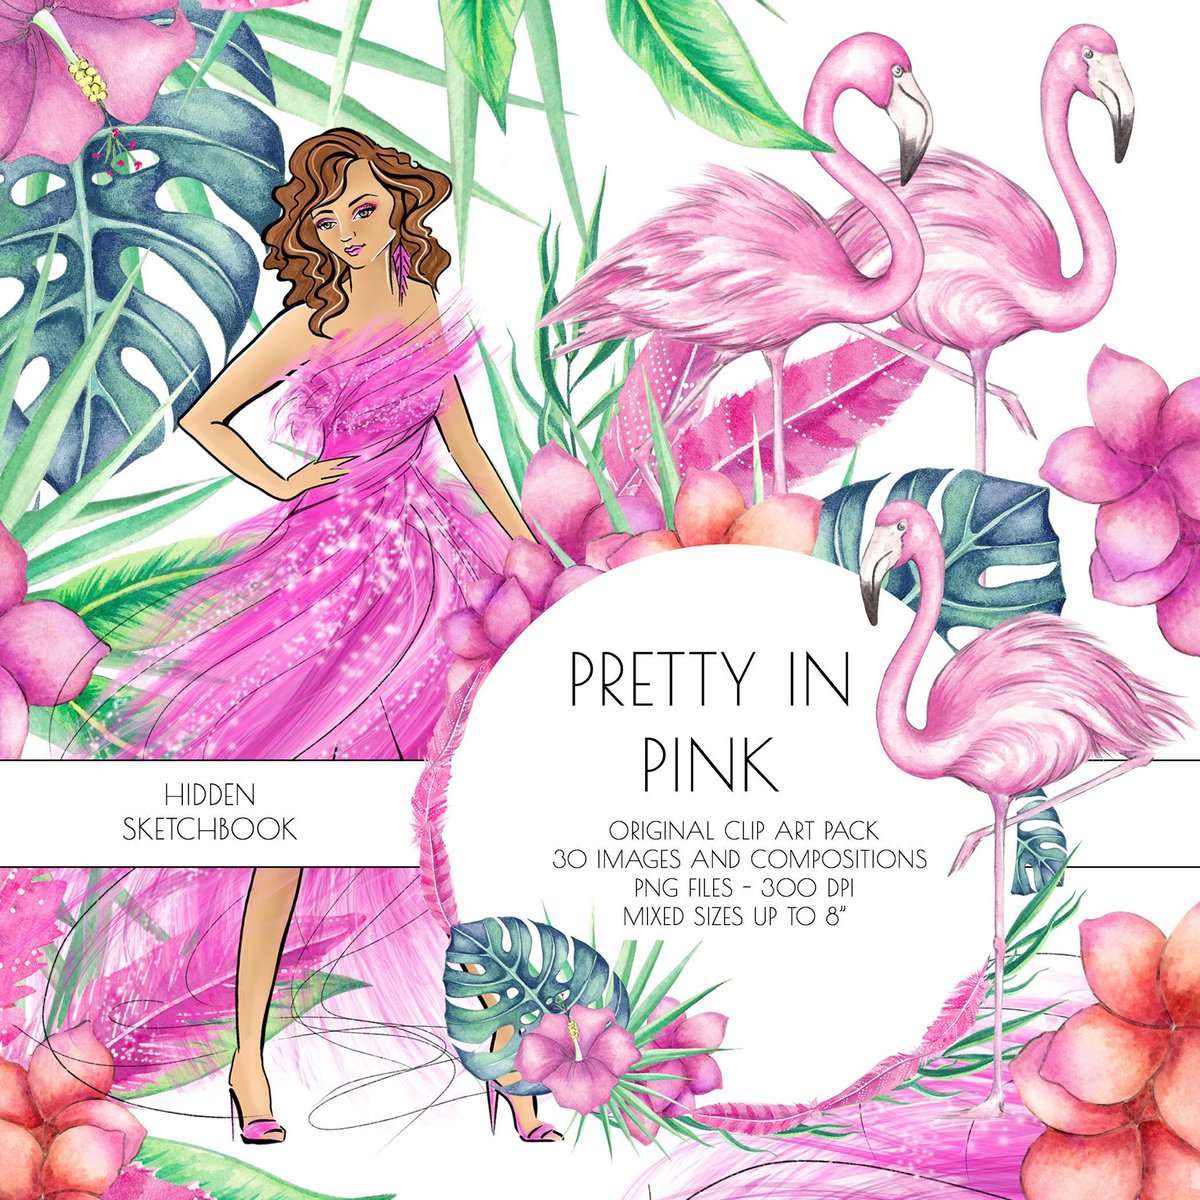 Excited to share the latest addition to my #etsy shop: Pretty in Pink Clip Art Summer Flamingo Summer Tropical Floral Graphics Hand Drawn Fashion Girl #pink #henparty #summerclipart #clipart #commercialclipart #handdrawnclipart #summer etsy.me/2YX6Iux